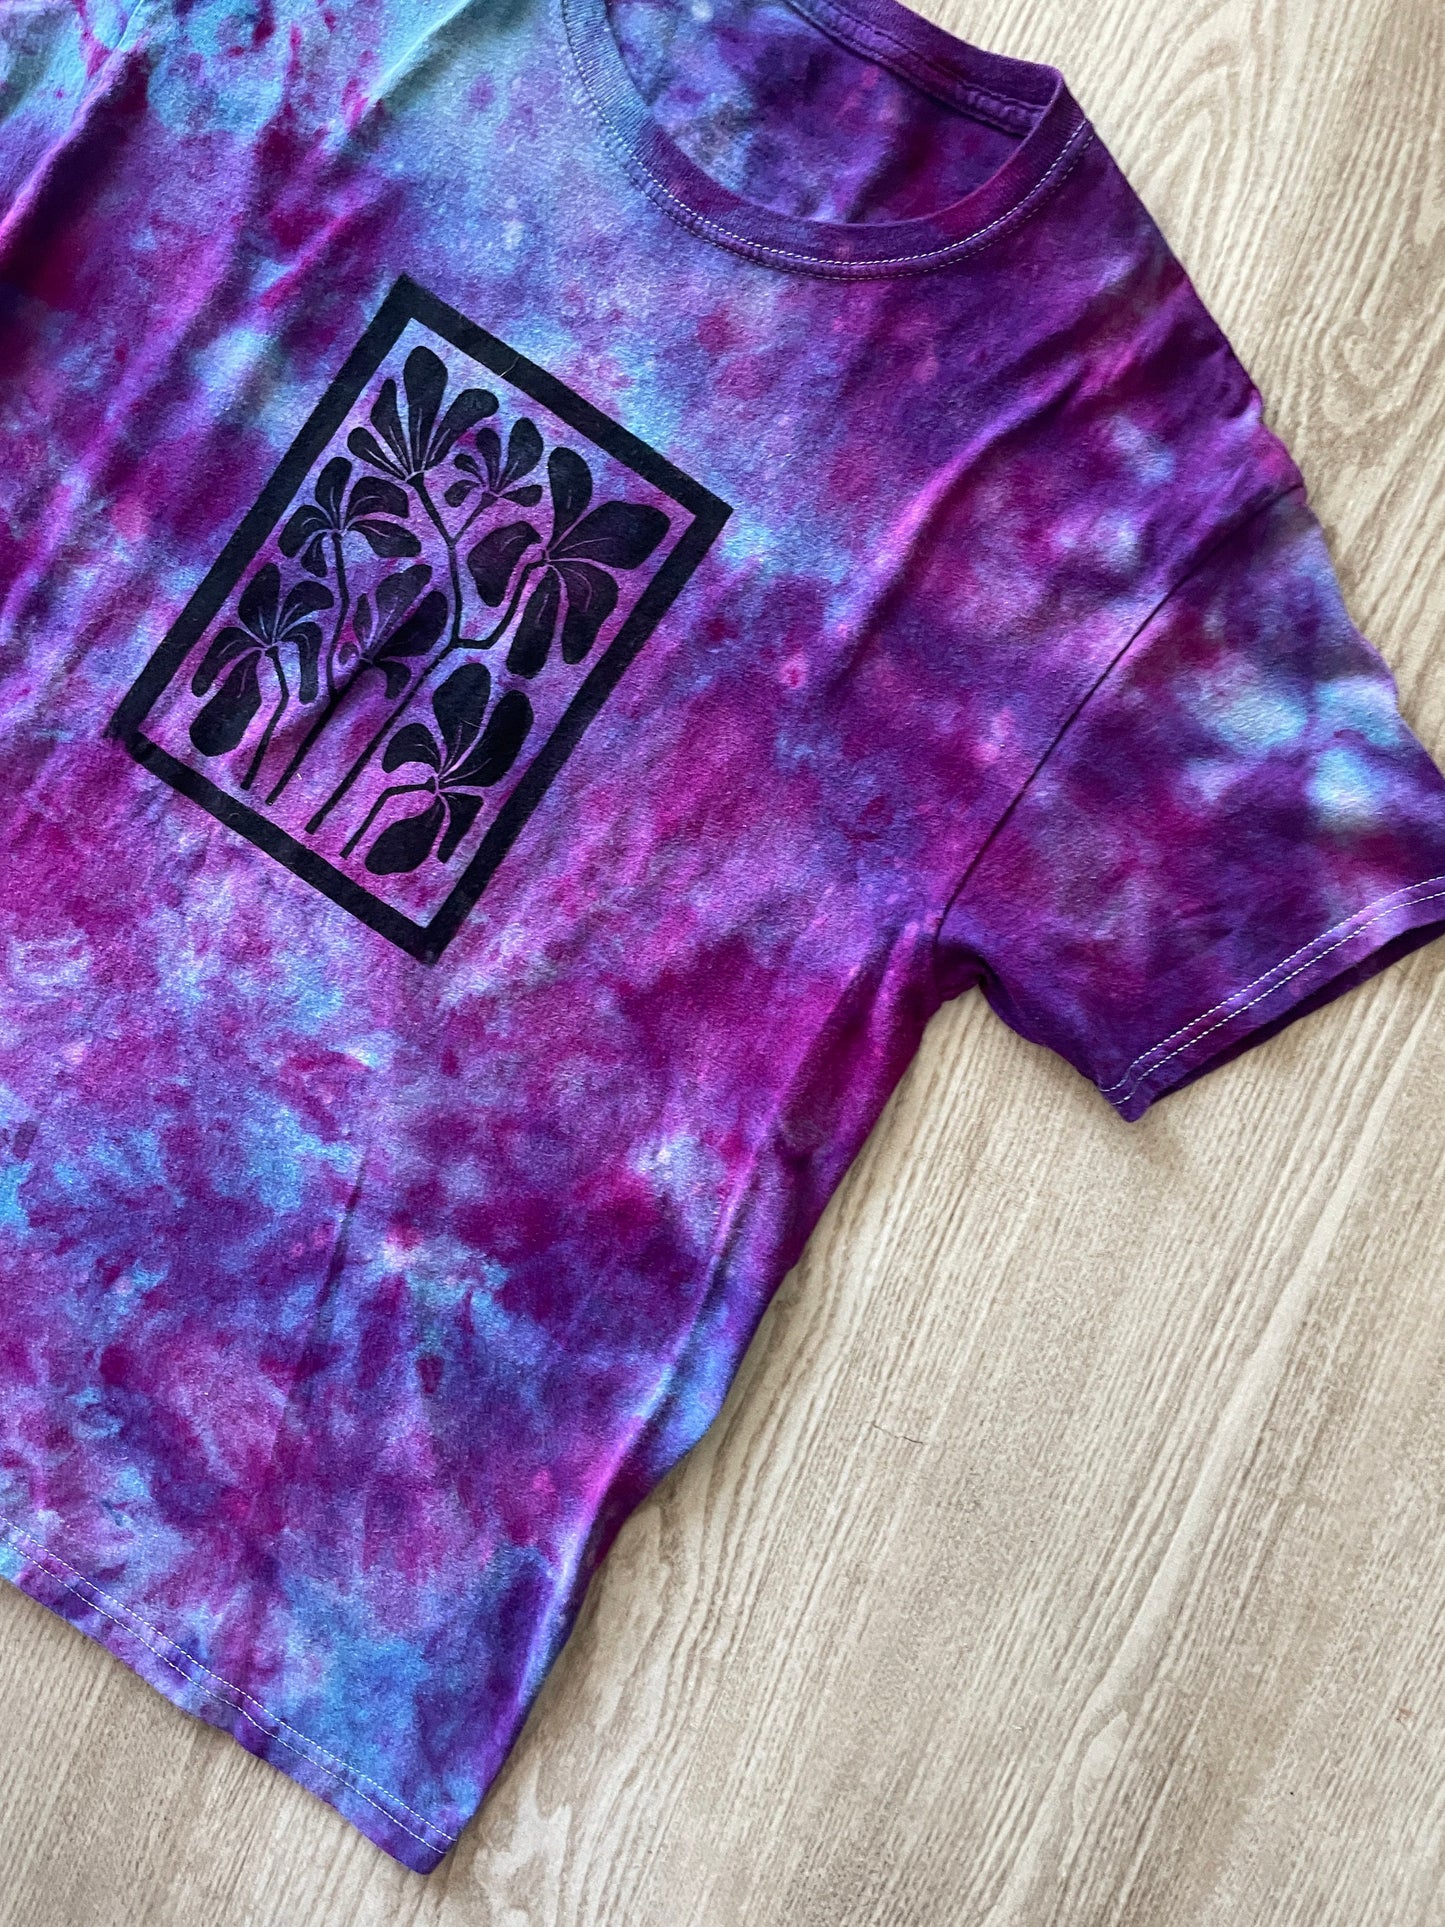 Medium Men's Hand-Printed Floral Galaxy Tie Dye Short Sleeve T-Shirt | Handmade One-Of-a-Kind Upcycled Blue, Purple, and Pink Ice Dye